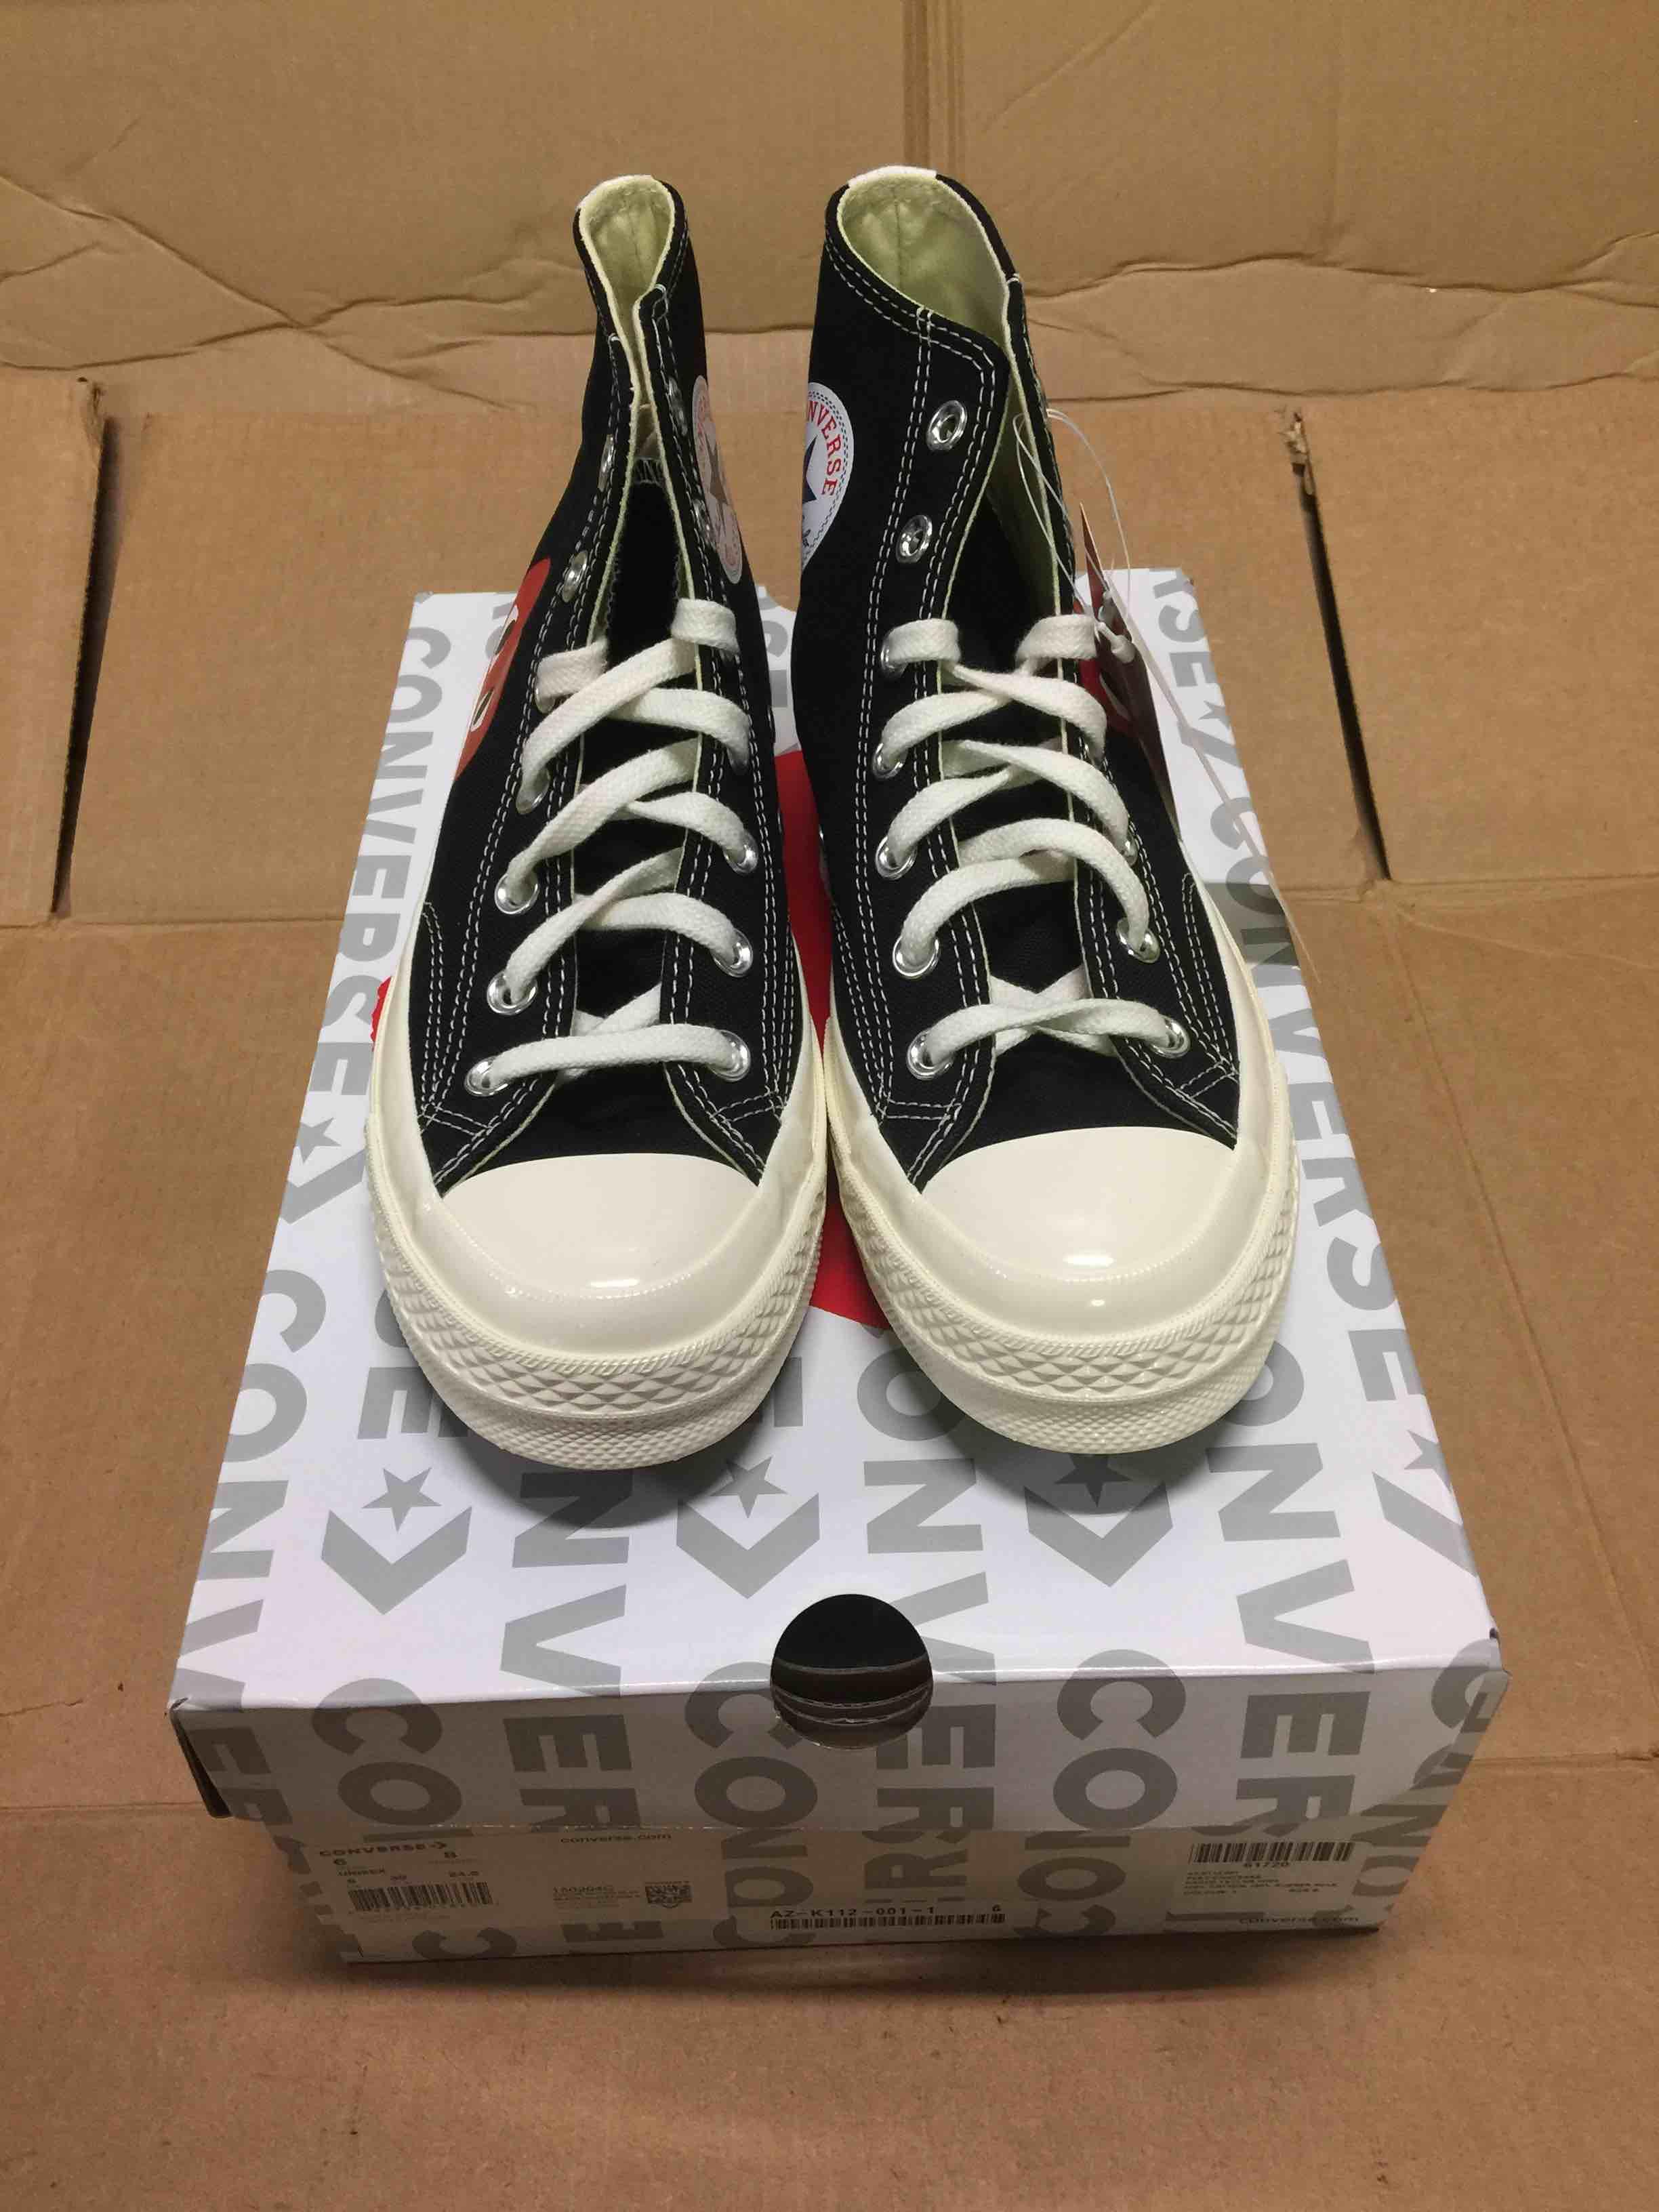 Comme Des Garcons X Converse Chuck Taylor High Canvas Sneaker without box | eBay